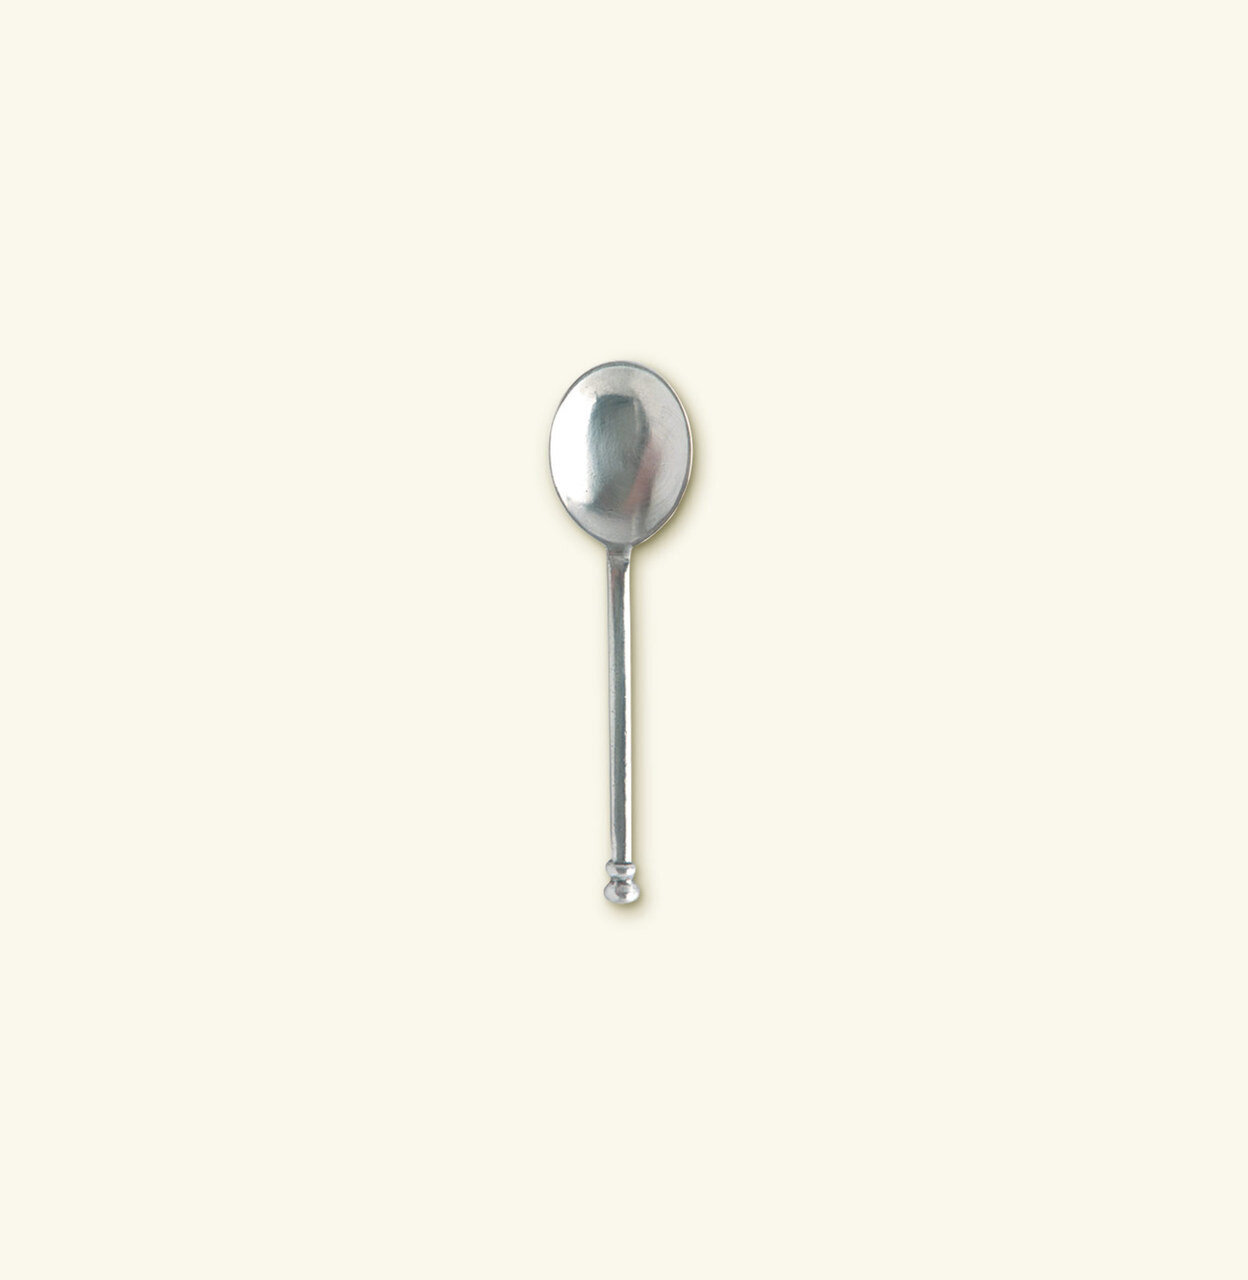 Match Pewter Small Ball Spoon 544.3